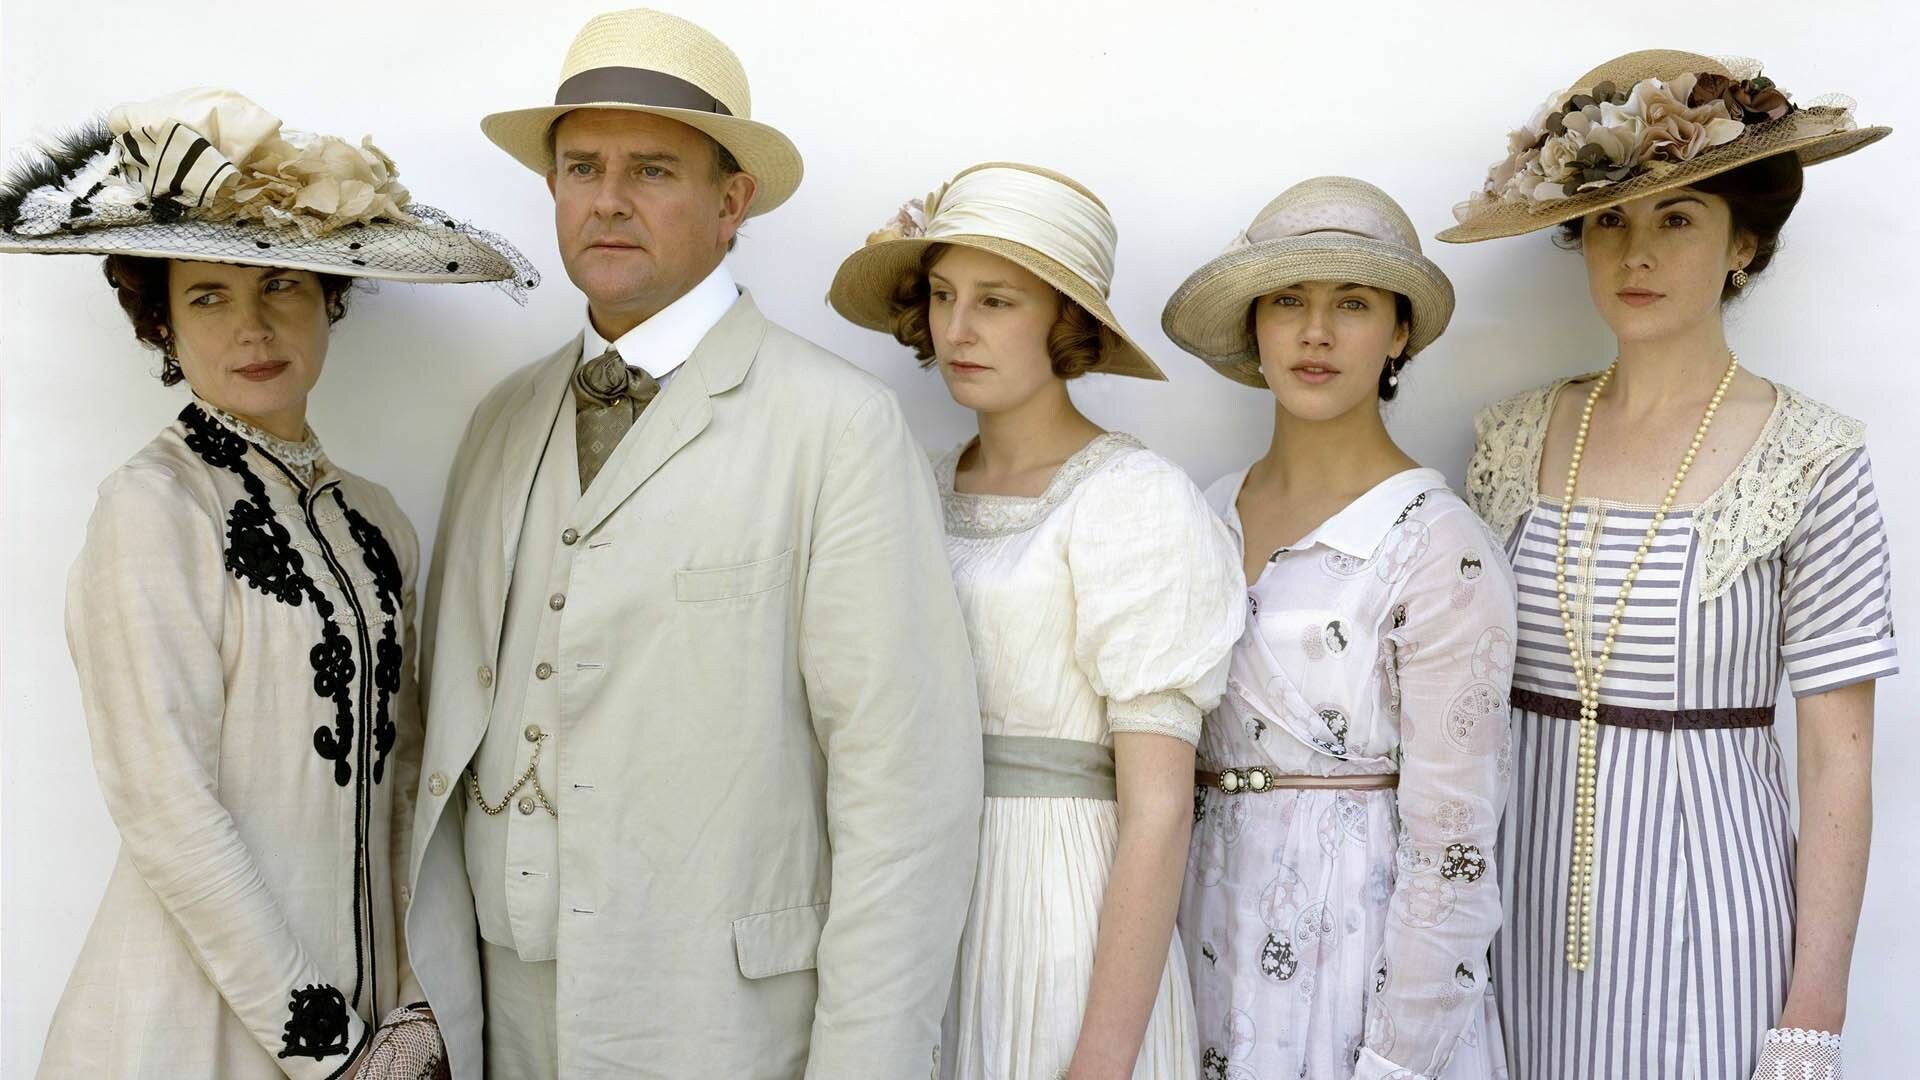 Downton Abbey: The Crawley Family, headed by the 7th Earl of Grantham and his wife Cora. 1920x1080 Full HD Background.